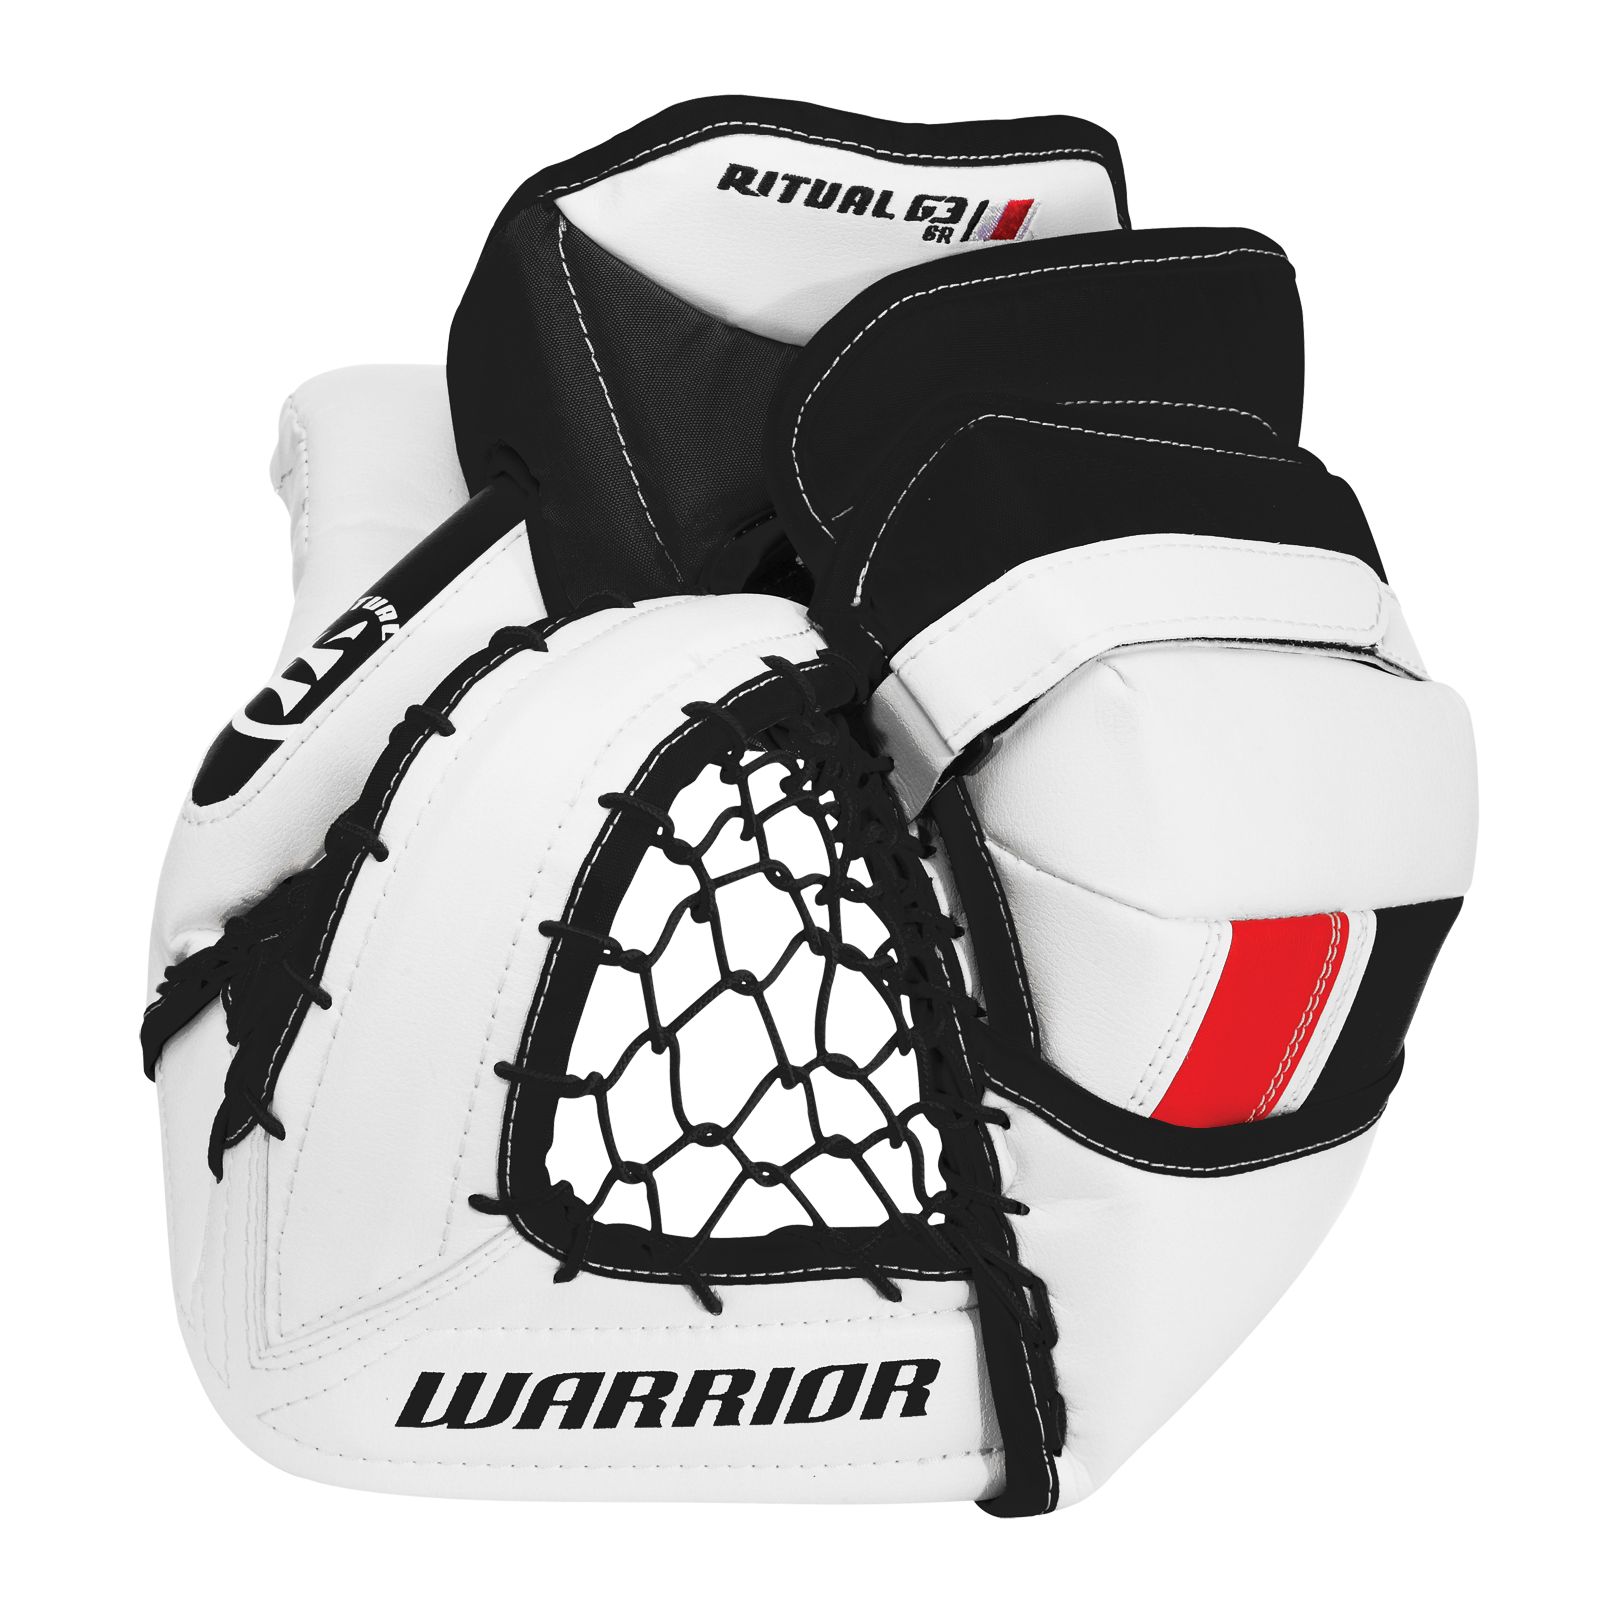 Ritual G3 Sr. Trapper, White with Black & Red image number 1